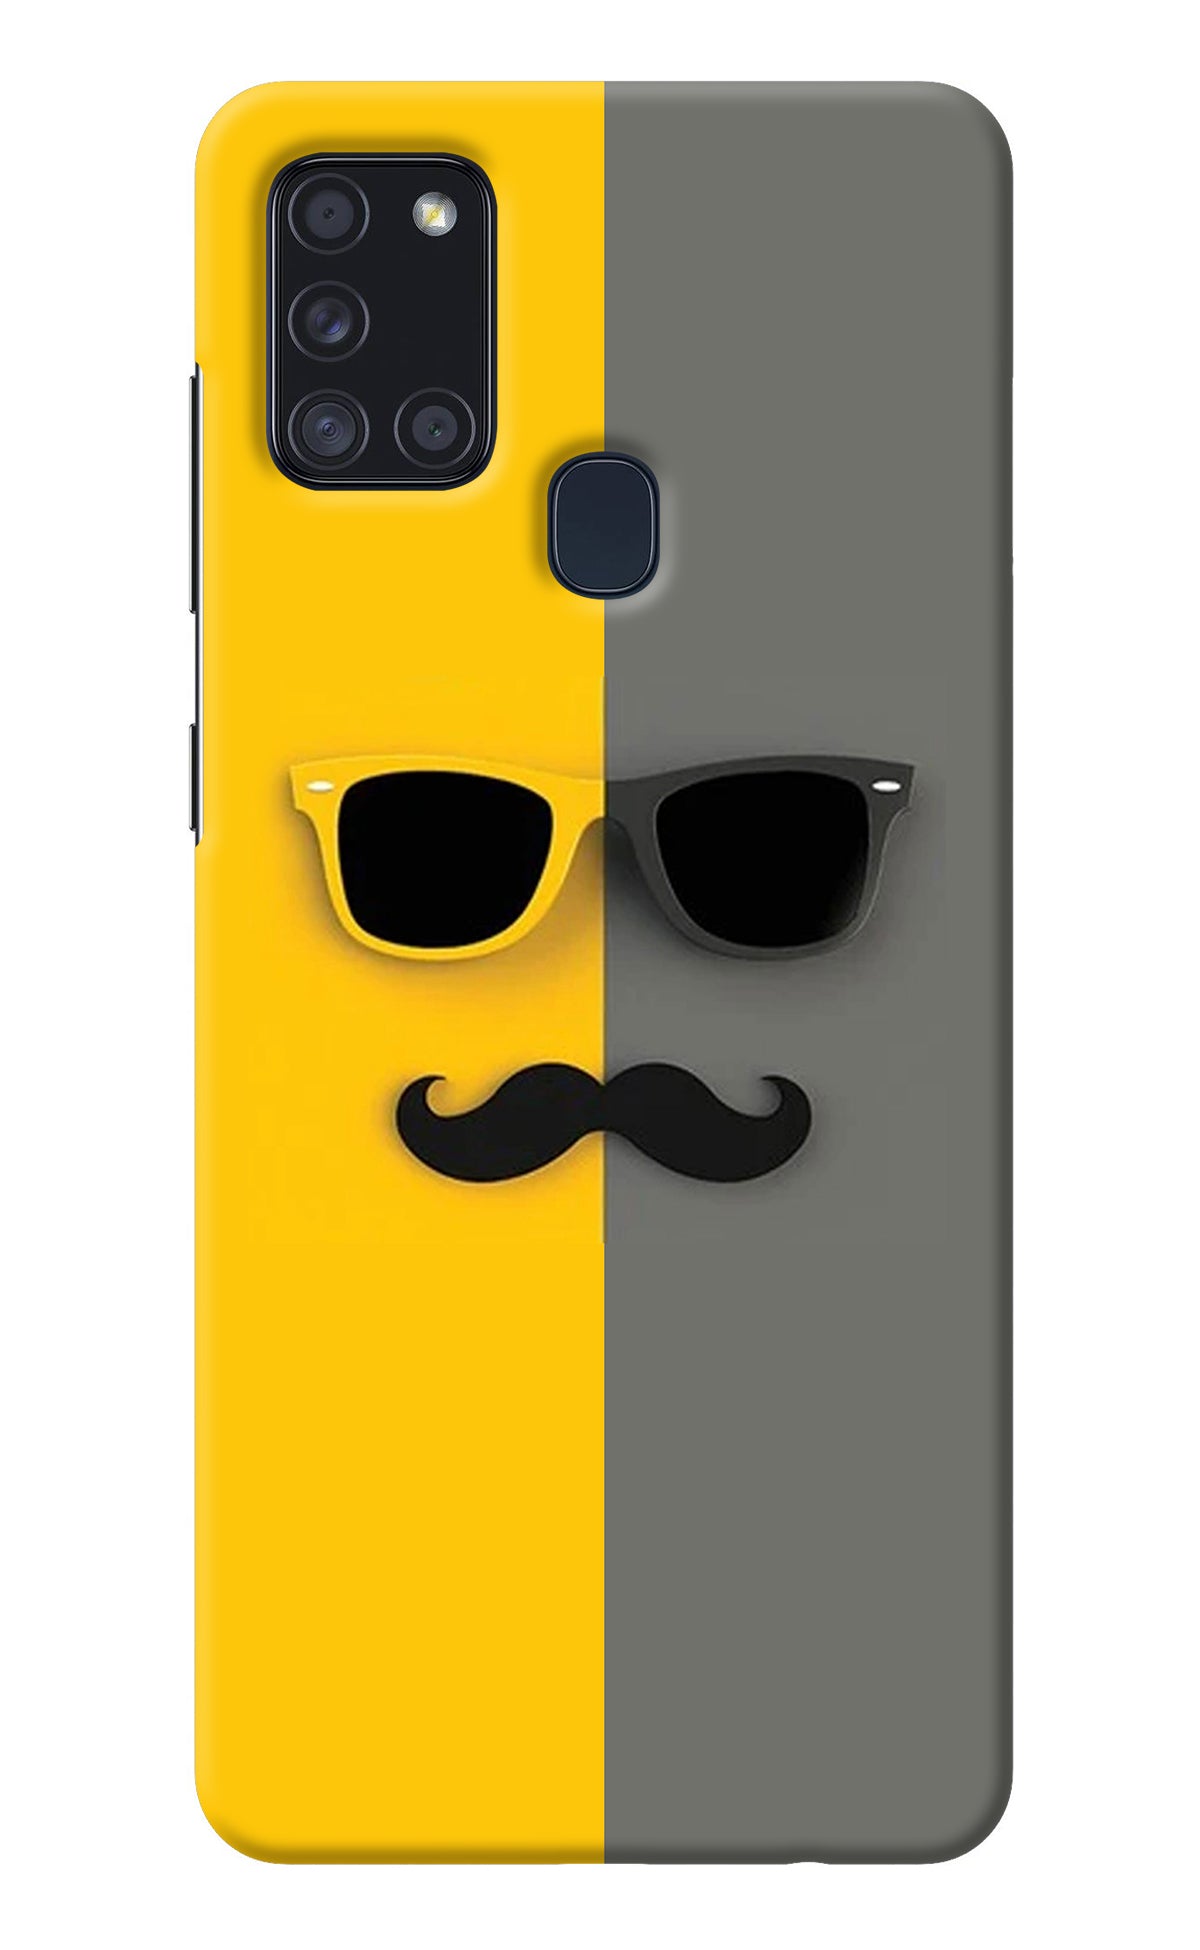 Sunglasses with Mustache Samsung A21s Back Cover